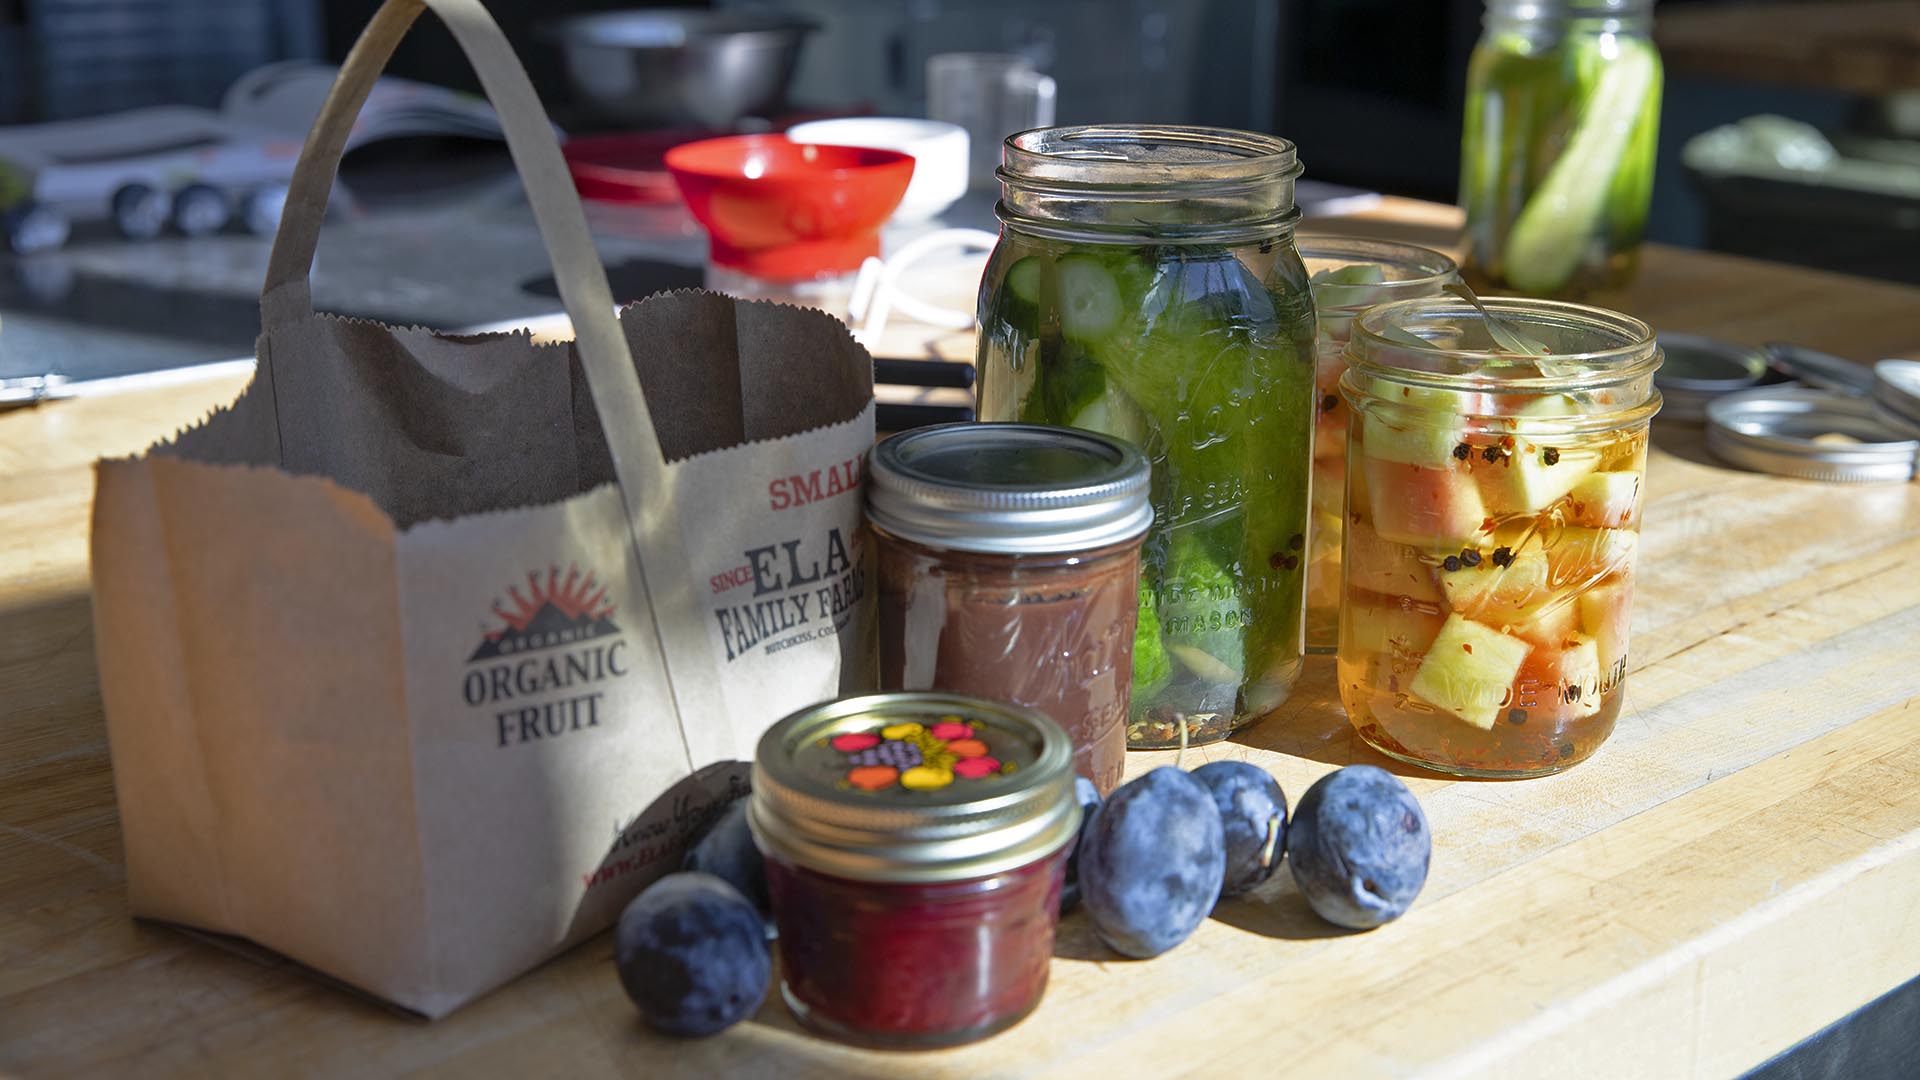 Jars of jam, pickles and watermelon rinds